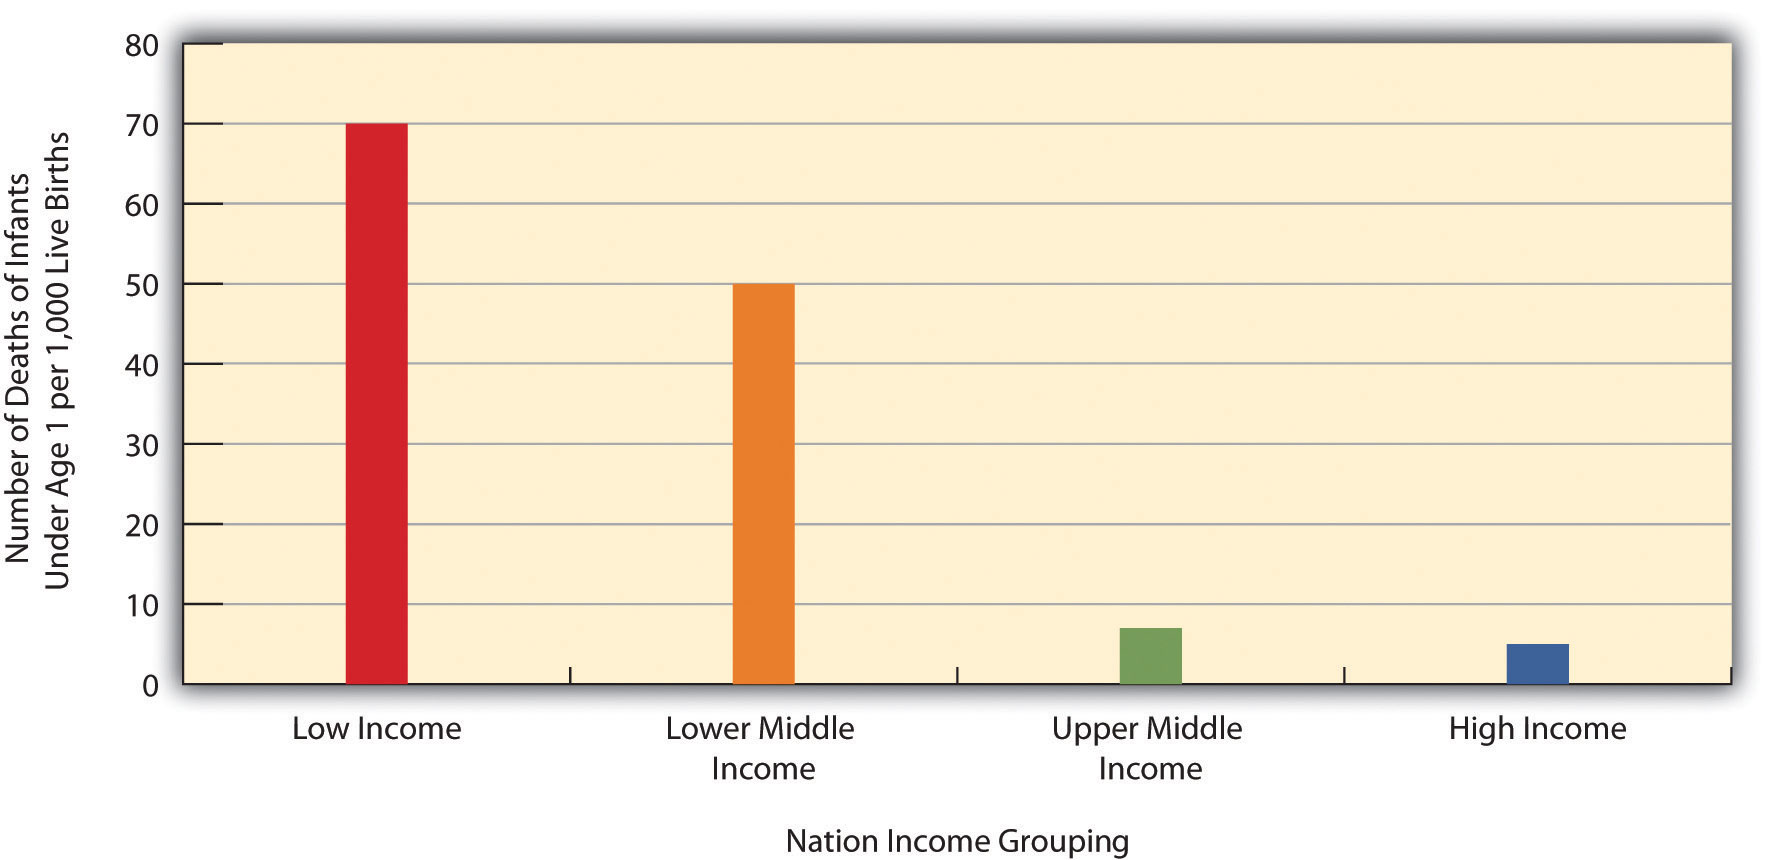 Infant Mortality for Low-Income, Lower-Middle-income, Higher-Middle-Income, and High-Income Nations